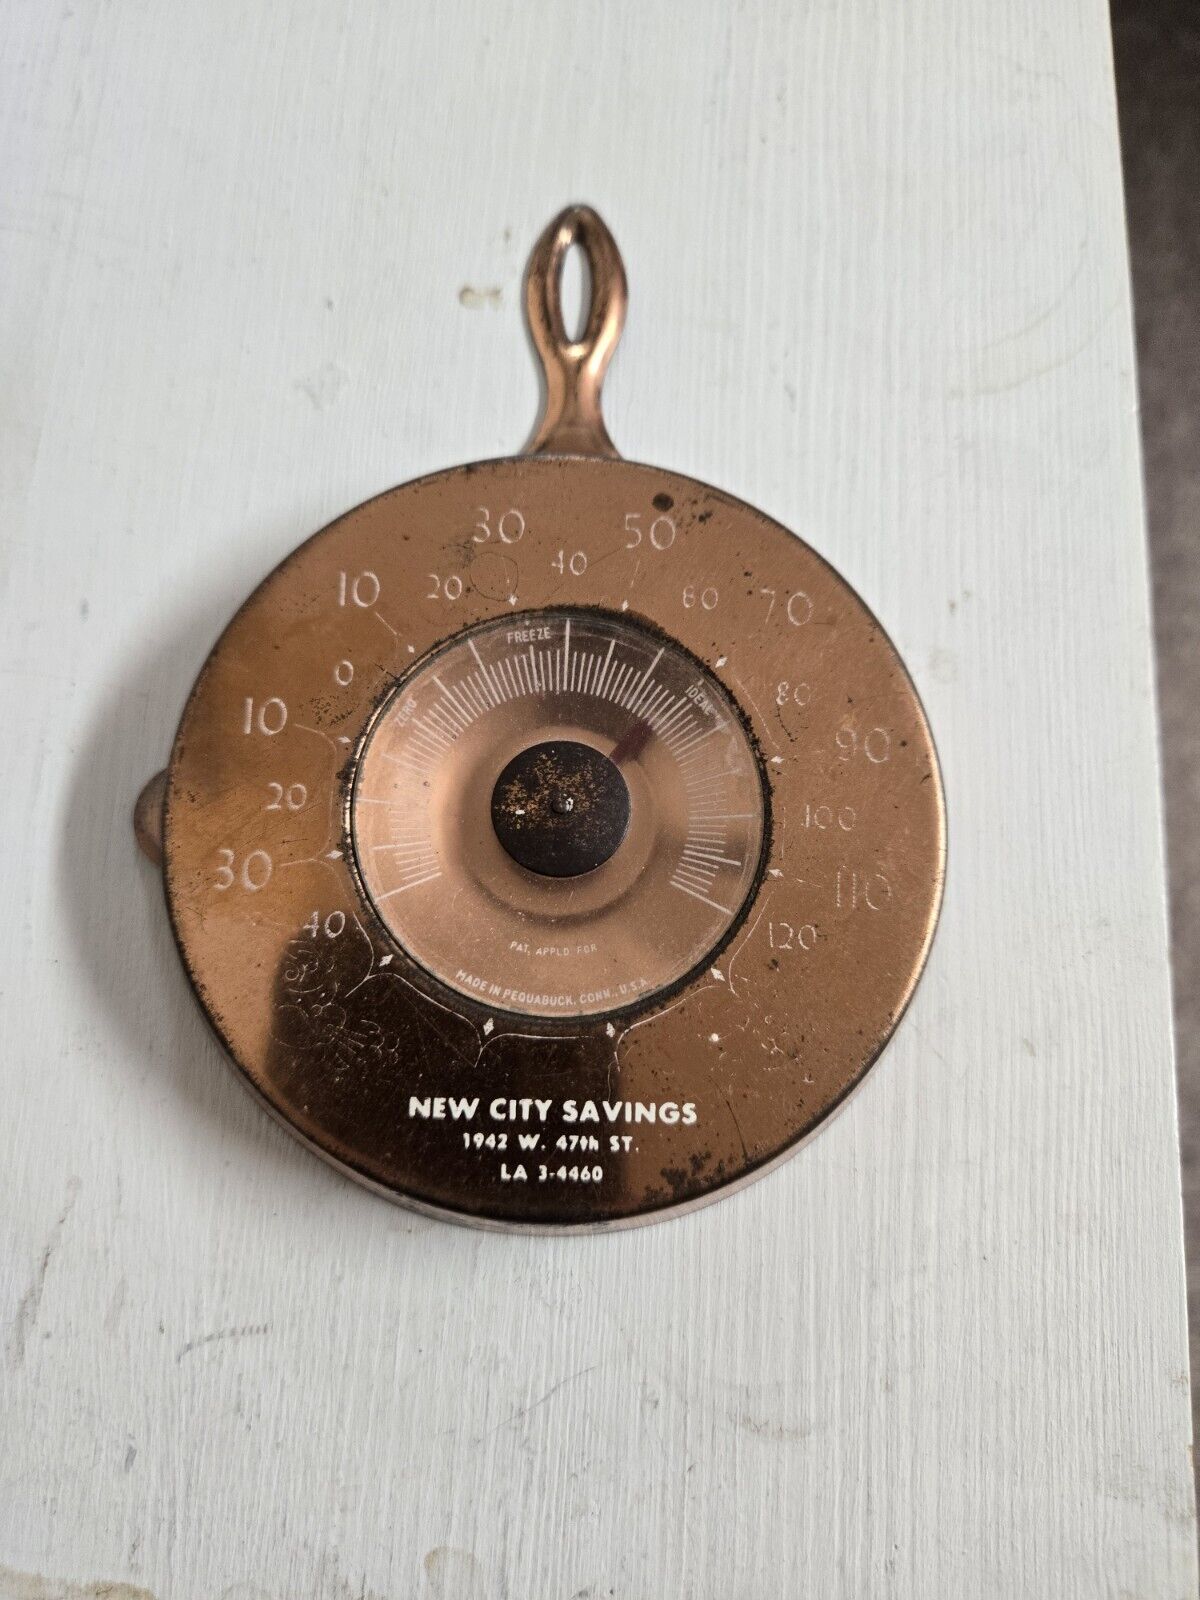 Vintage Metal FRYING PAN Thermometer Cooper Advertising Copper Or Bronze Color.